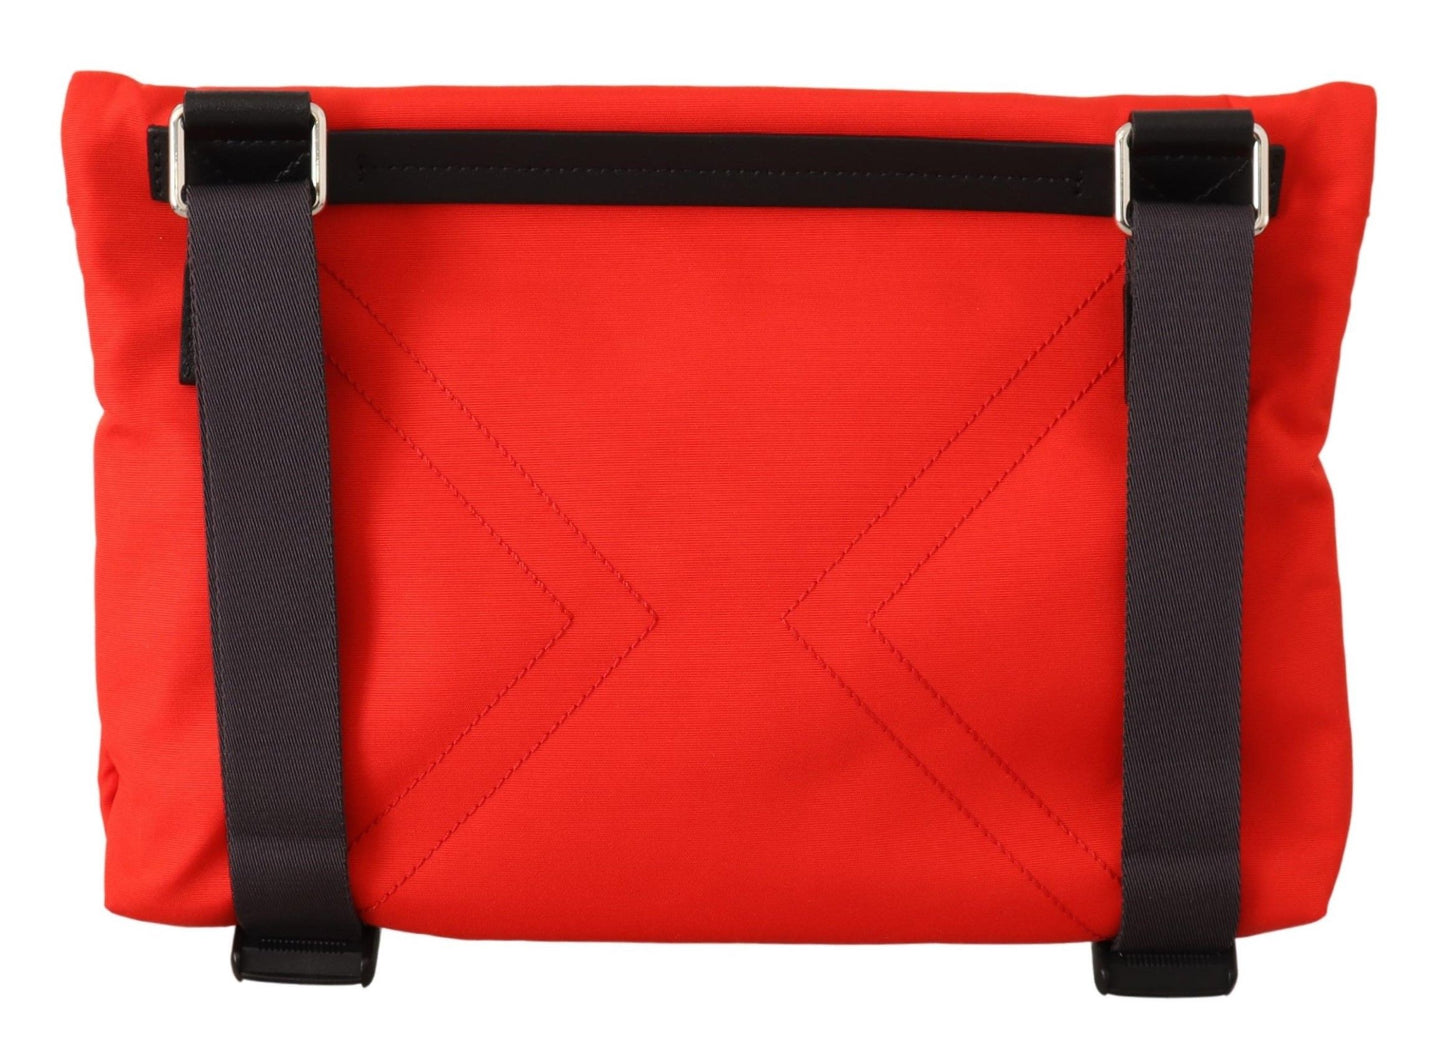 Chic Red and Black Downtown Crossbody Bag